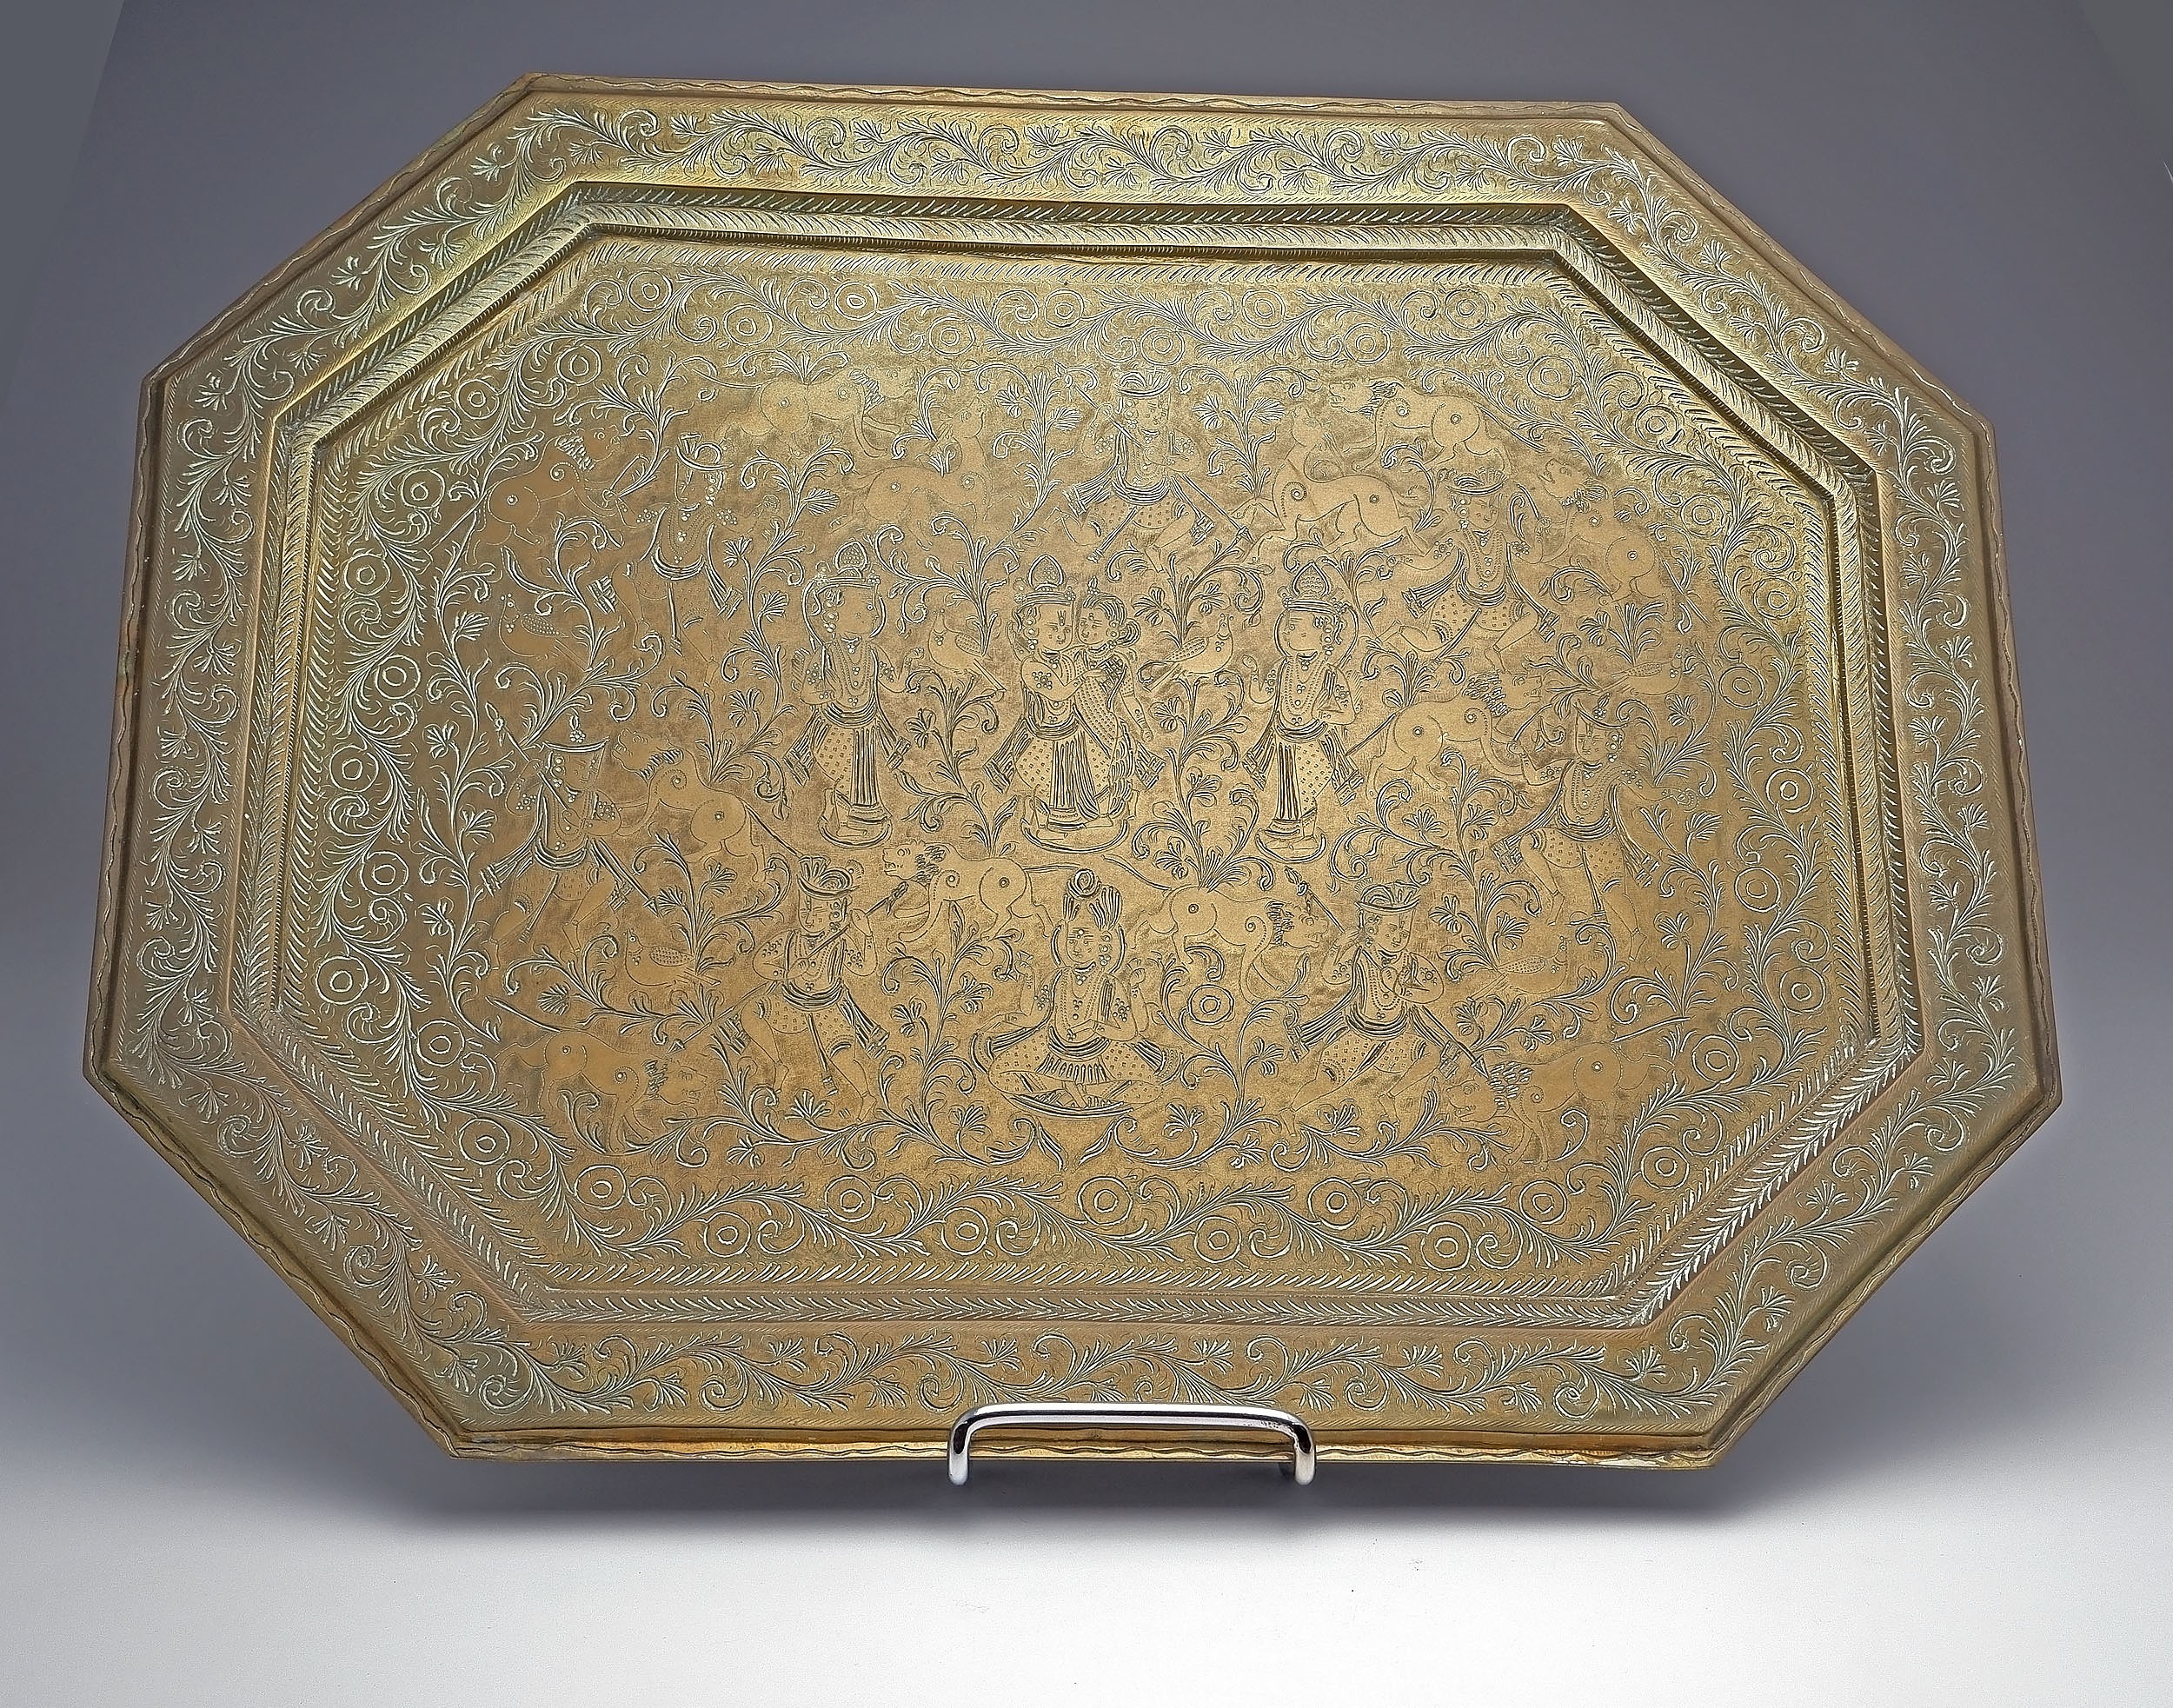 'Antique Indo Persian Engraved Brass Tray'